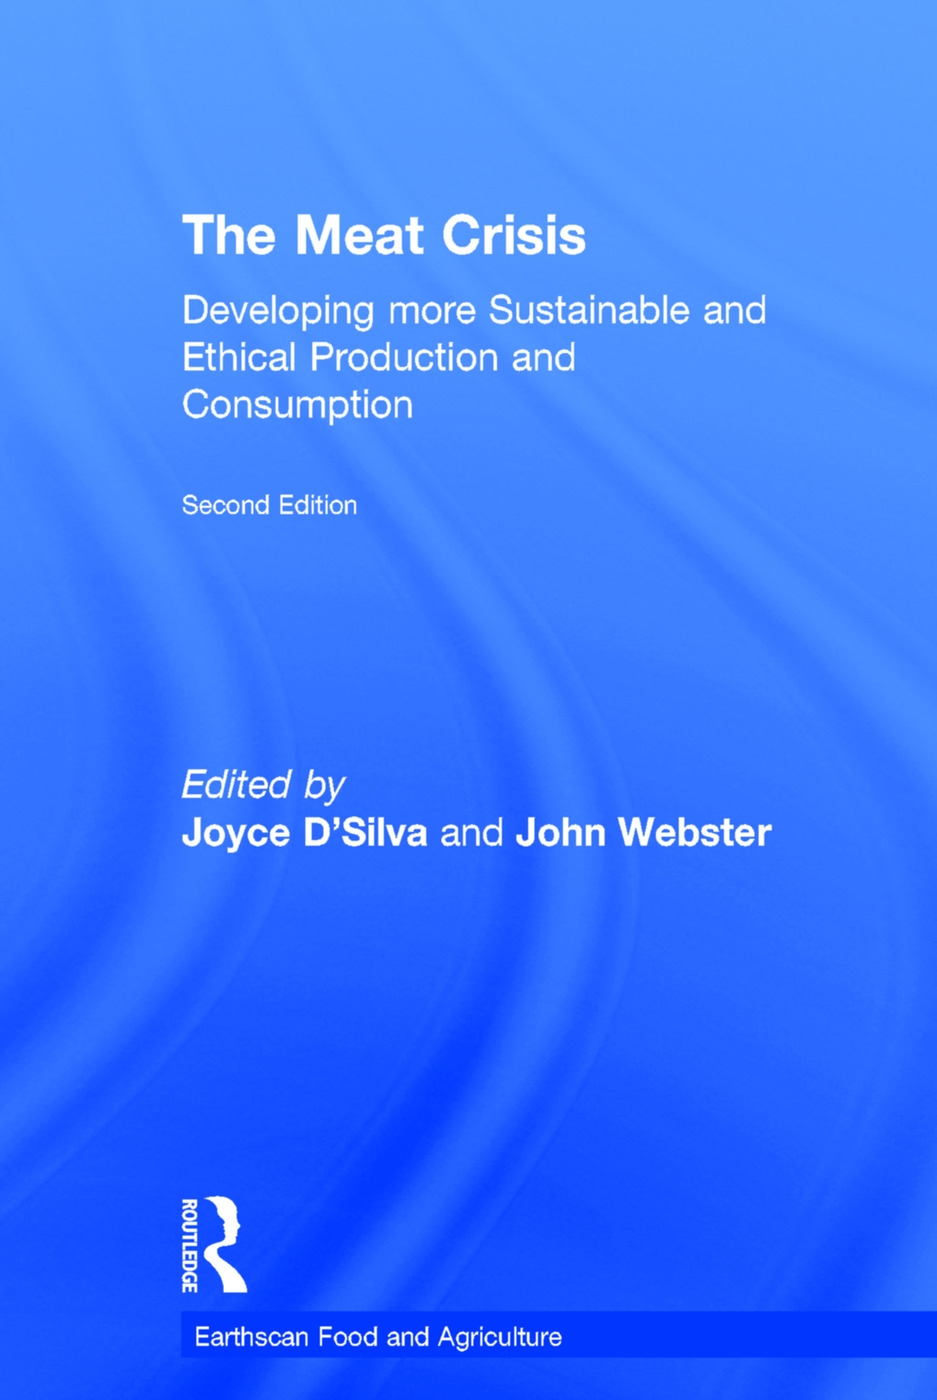 The Meat Crisis: Developing More Sustainable and Ethical Production and Consumption